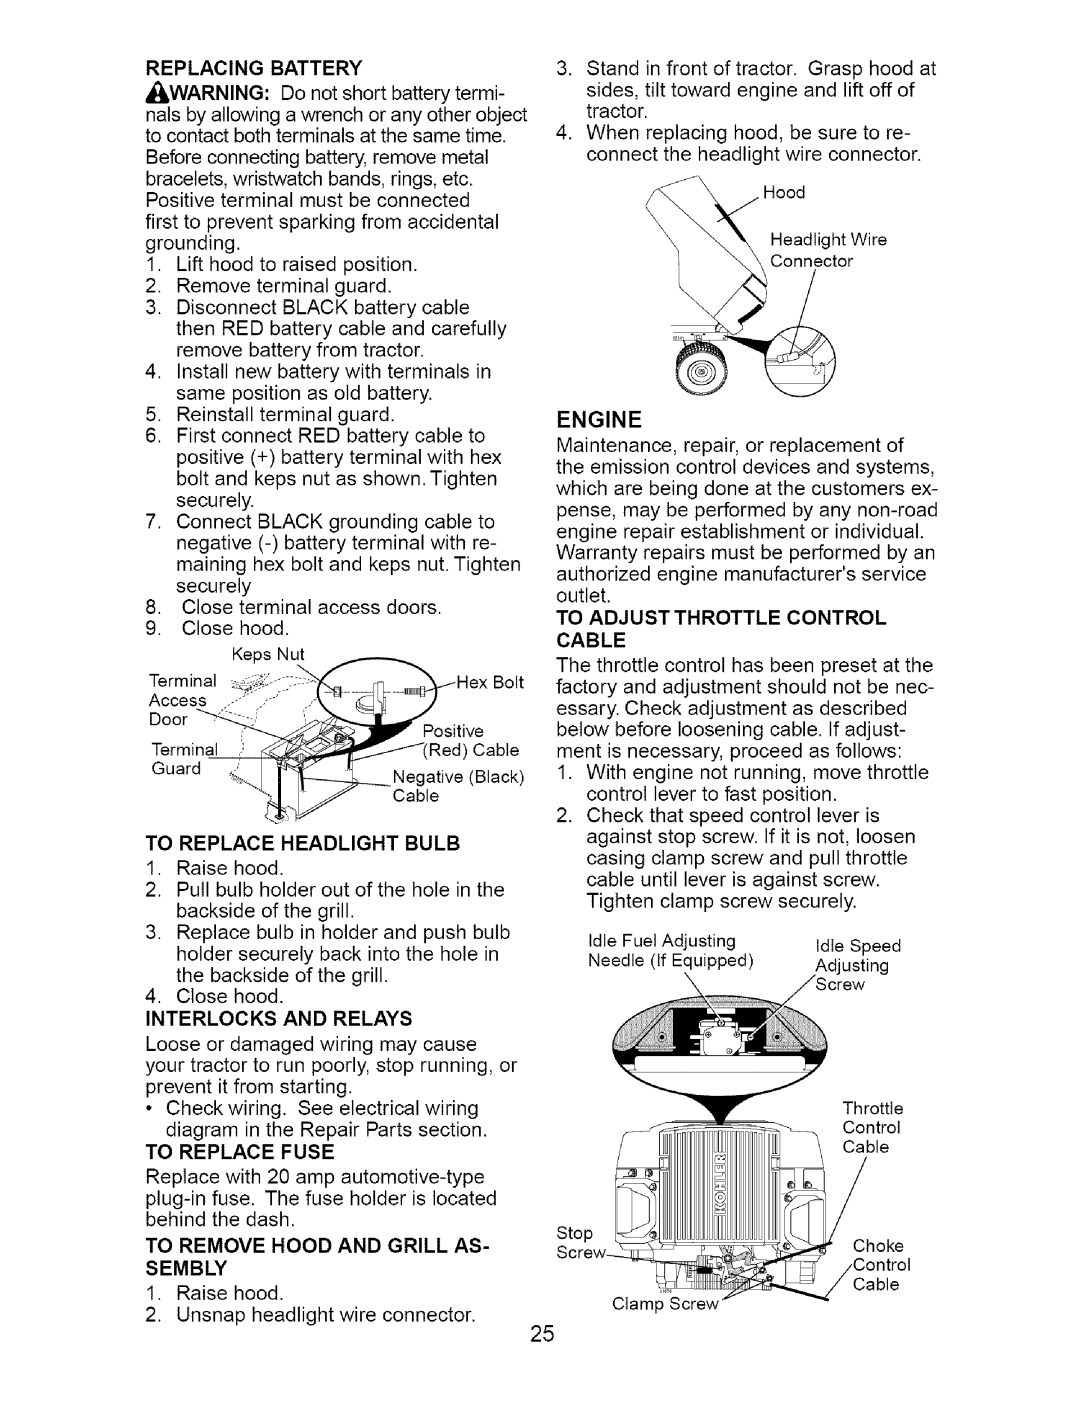 Craftsman 917.273663 owner manual Replacing, Battery, _Warning, Do not short battery termi, To Replace Headlight Bulb 